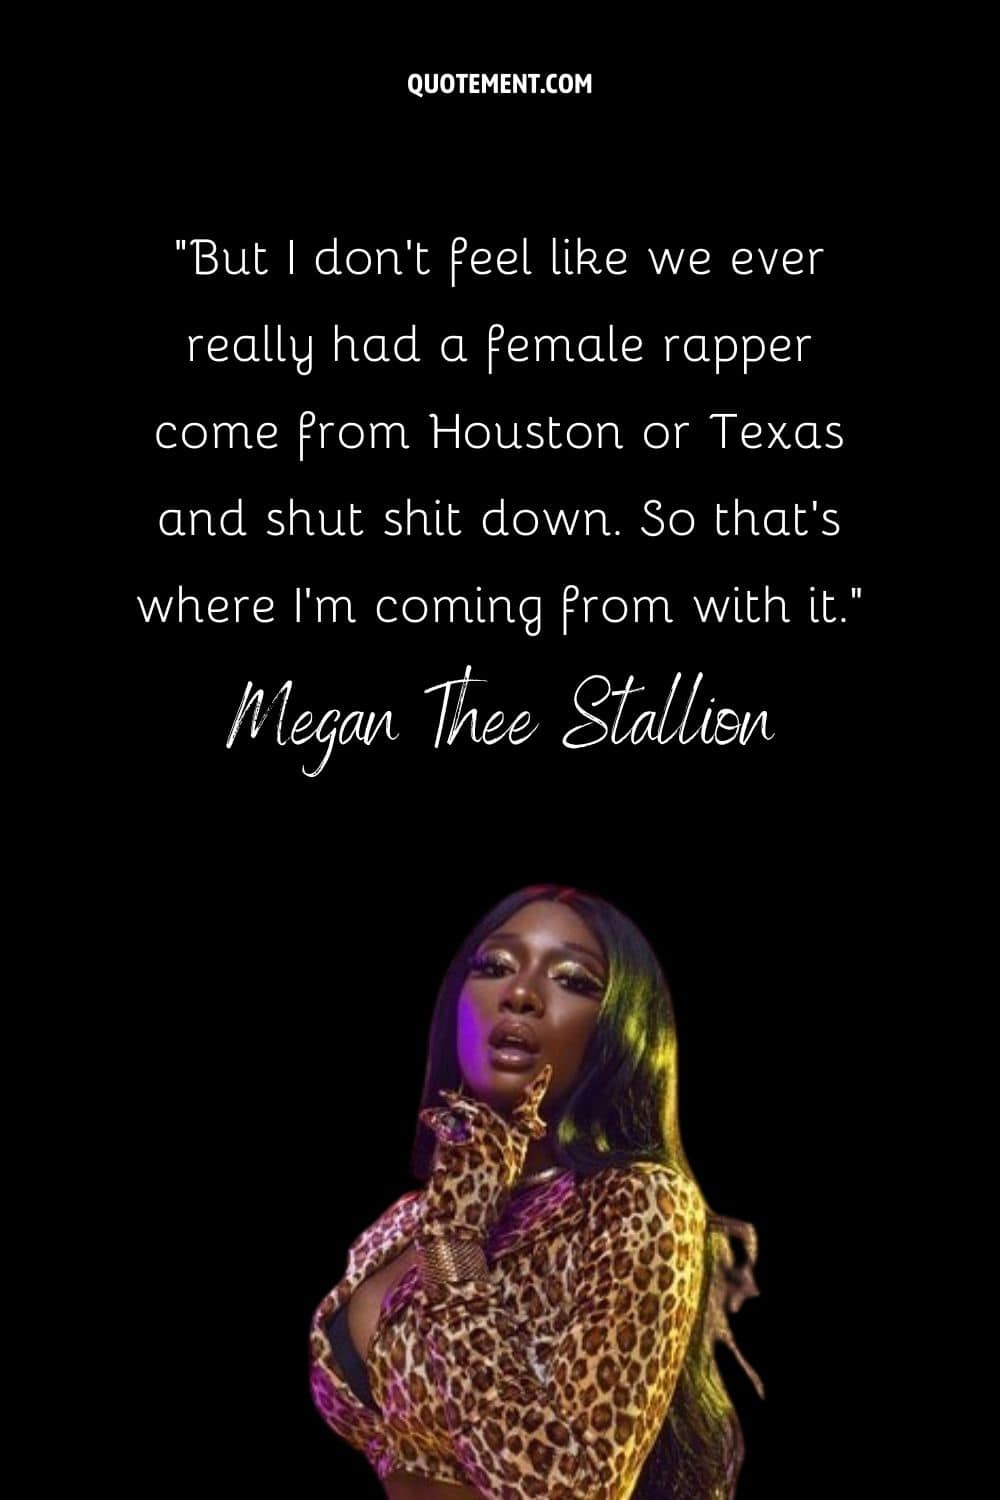 “But I don’t feel like we ever really had a female rapper come from Houston or Texas and shut shit down. So that’s where I’m coming from with it.” — Megan Thee Stallion